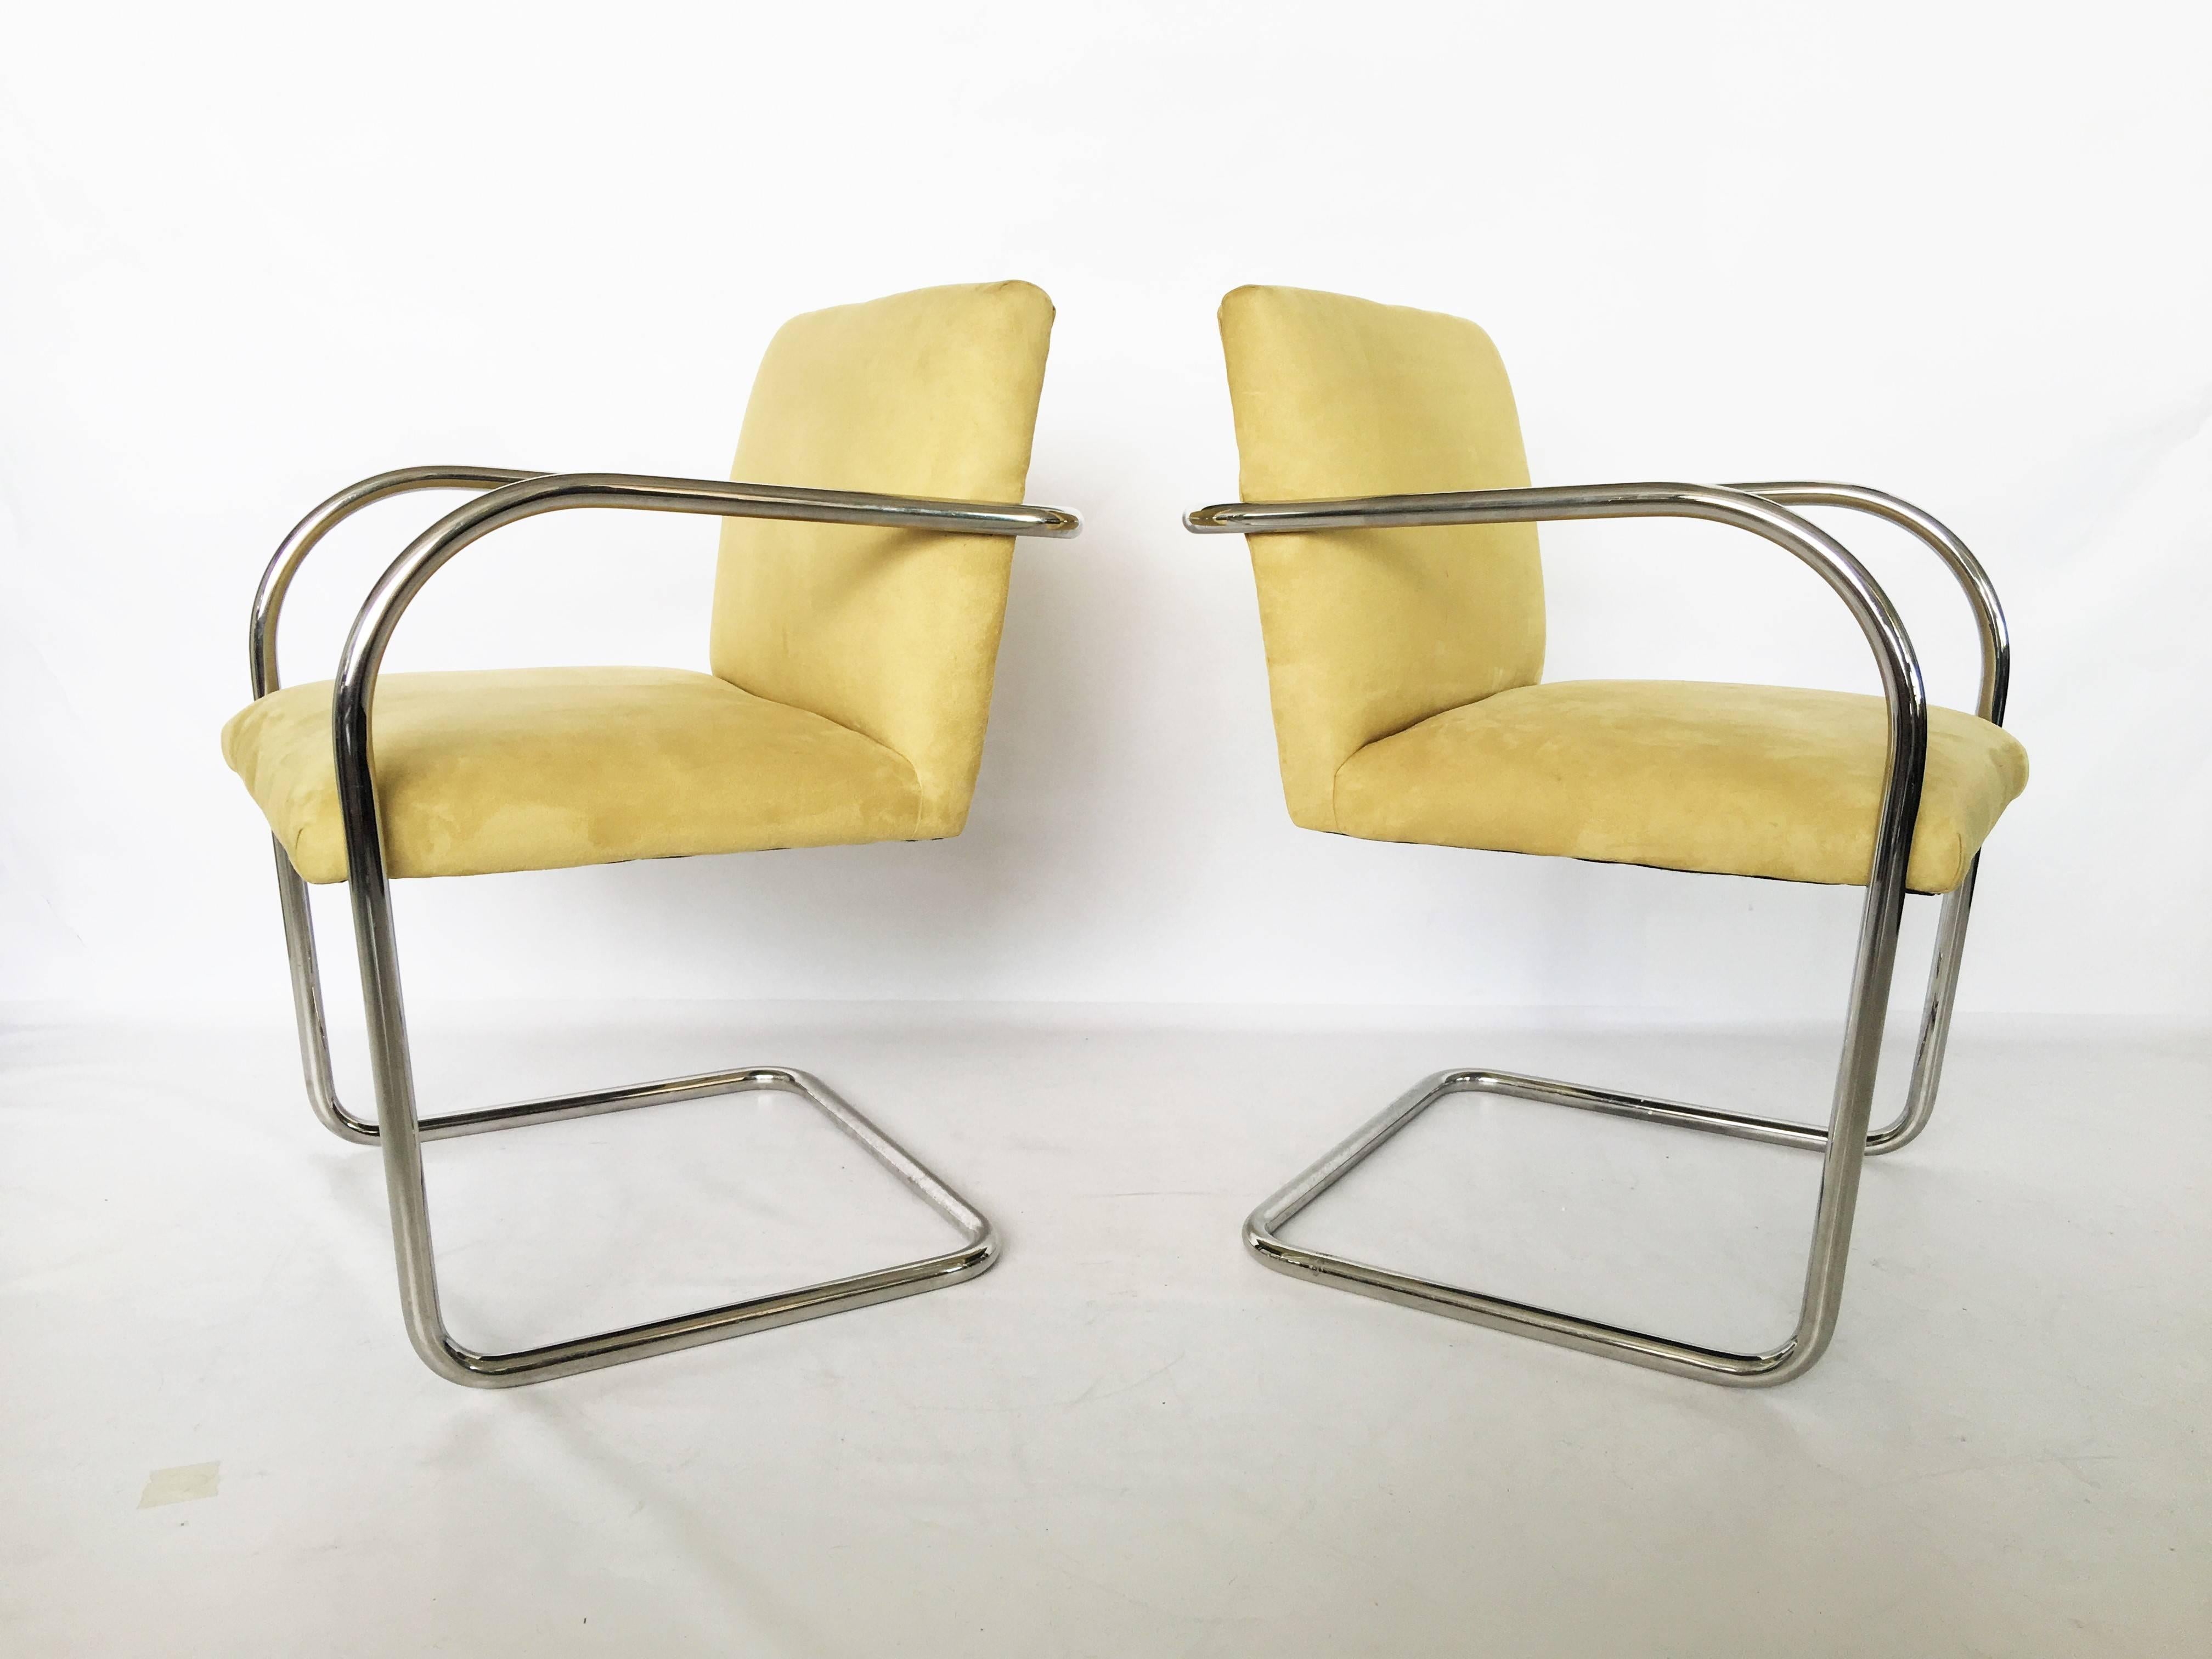 Pair of Suede Mies Van Der Rohe Tubular Brno Chairs by Knoll In Good Condition For Sale In Dallas, TX